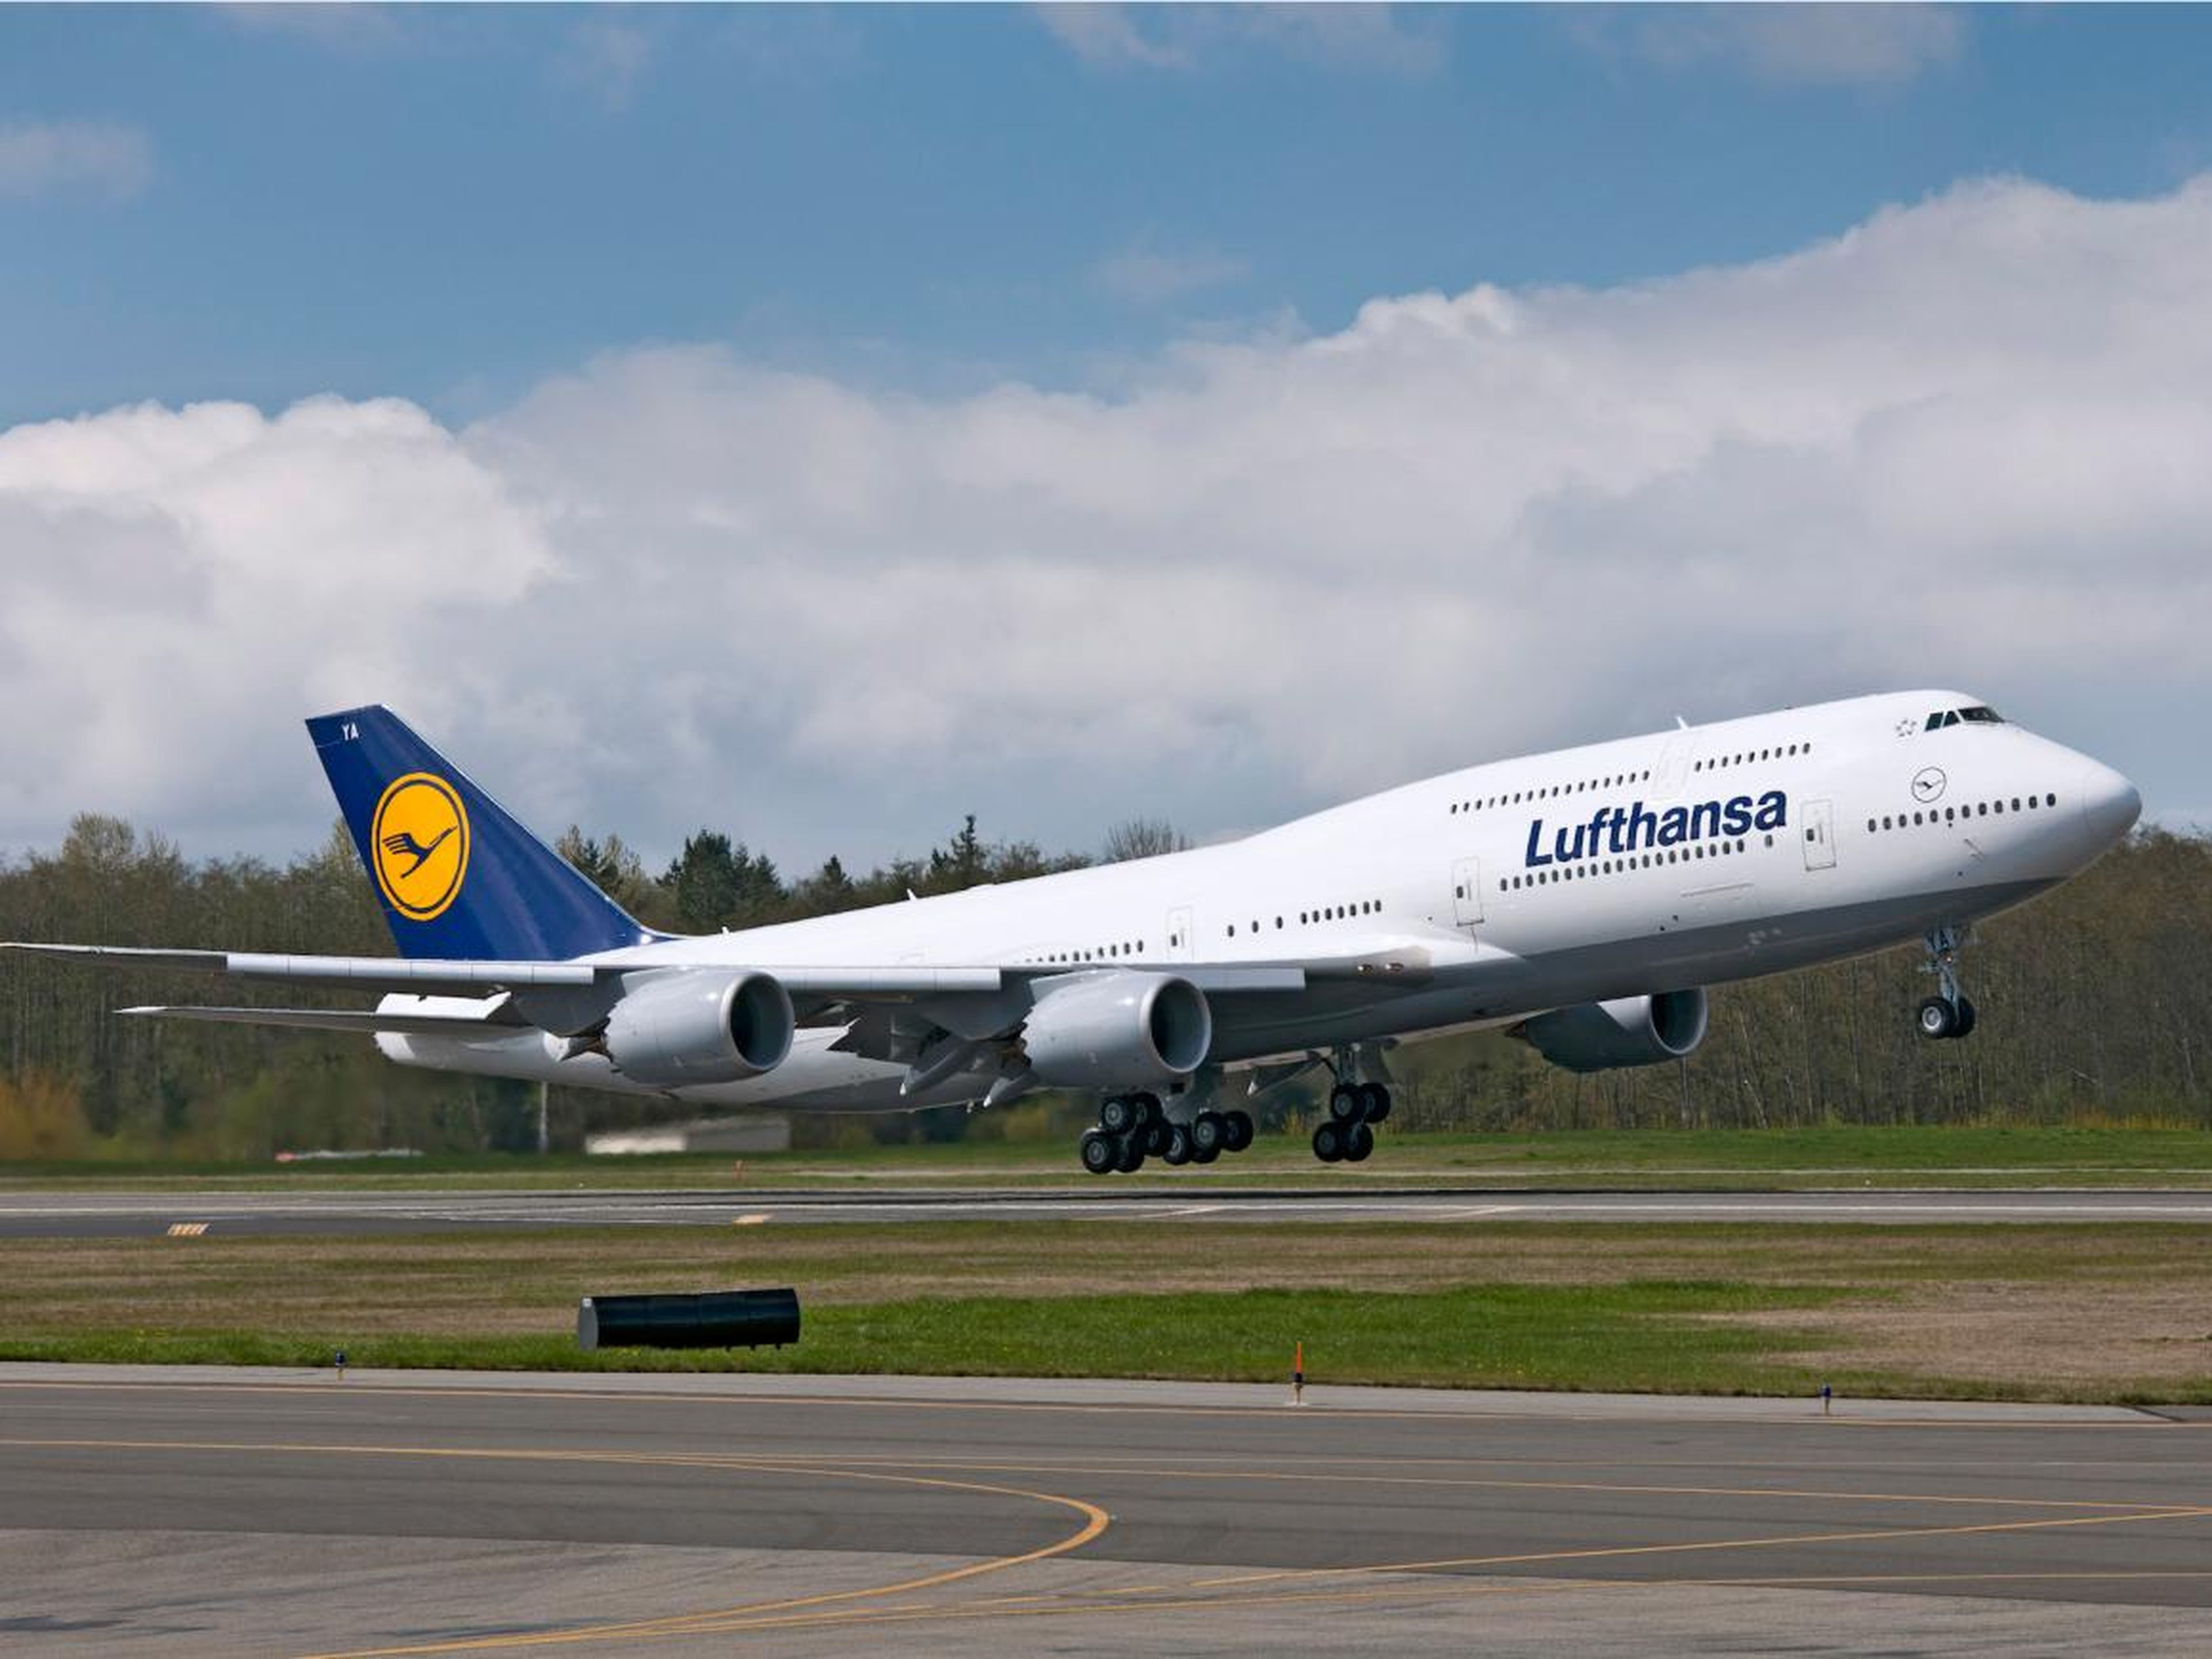 Only the Boeing 747-8 is longer, at 250 feet and two inches (although the A380 can carry many more passengers).